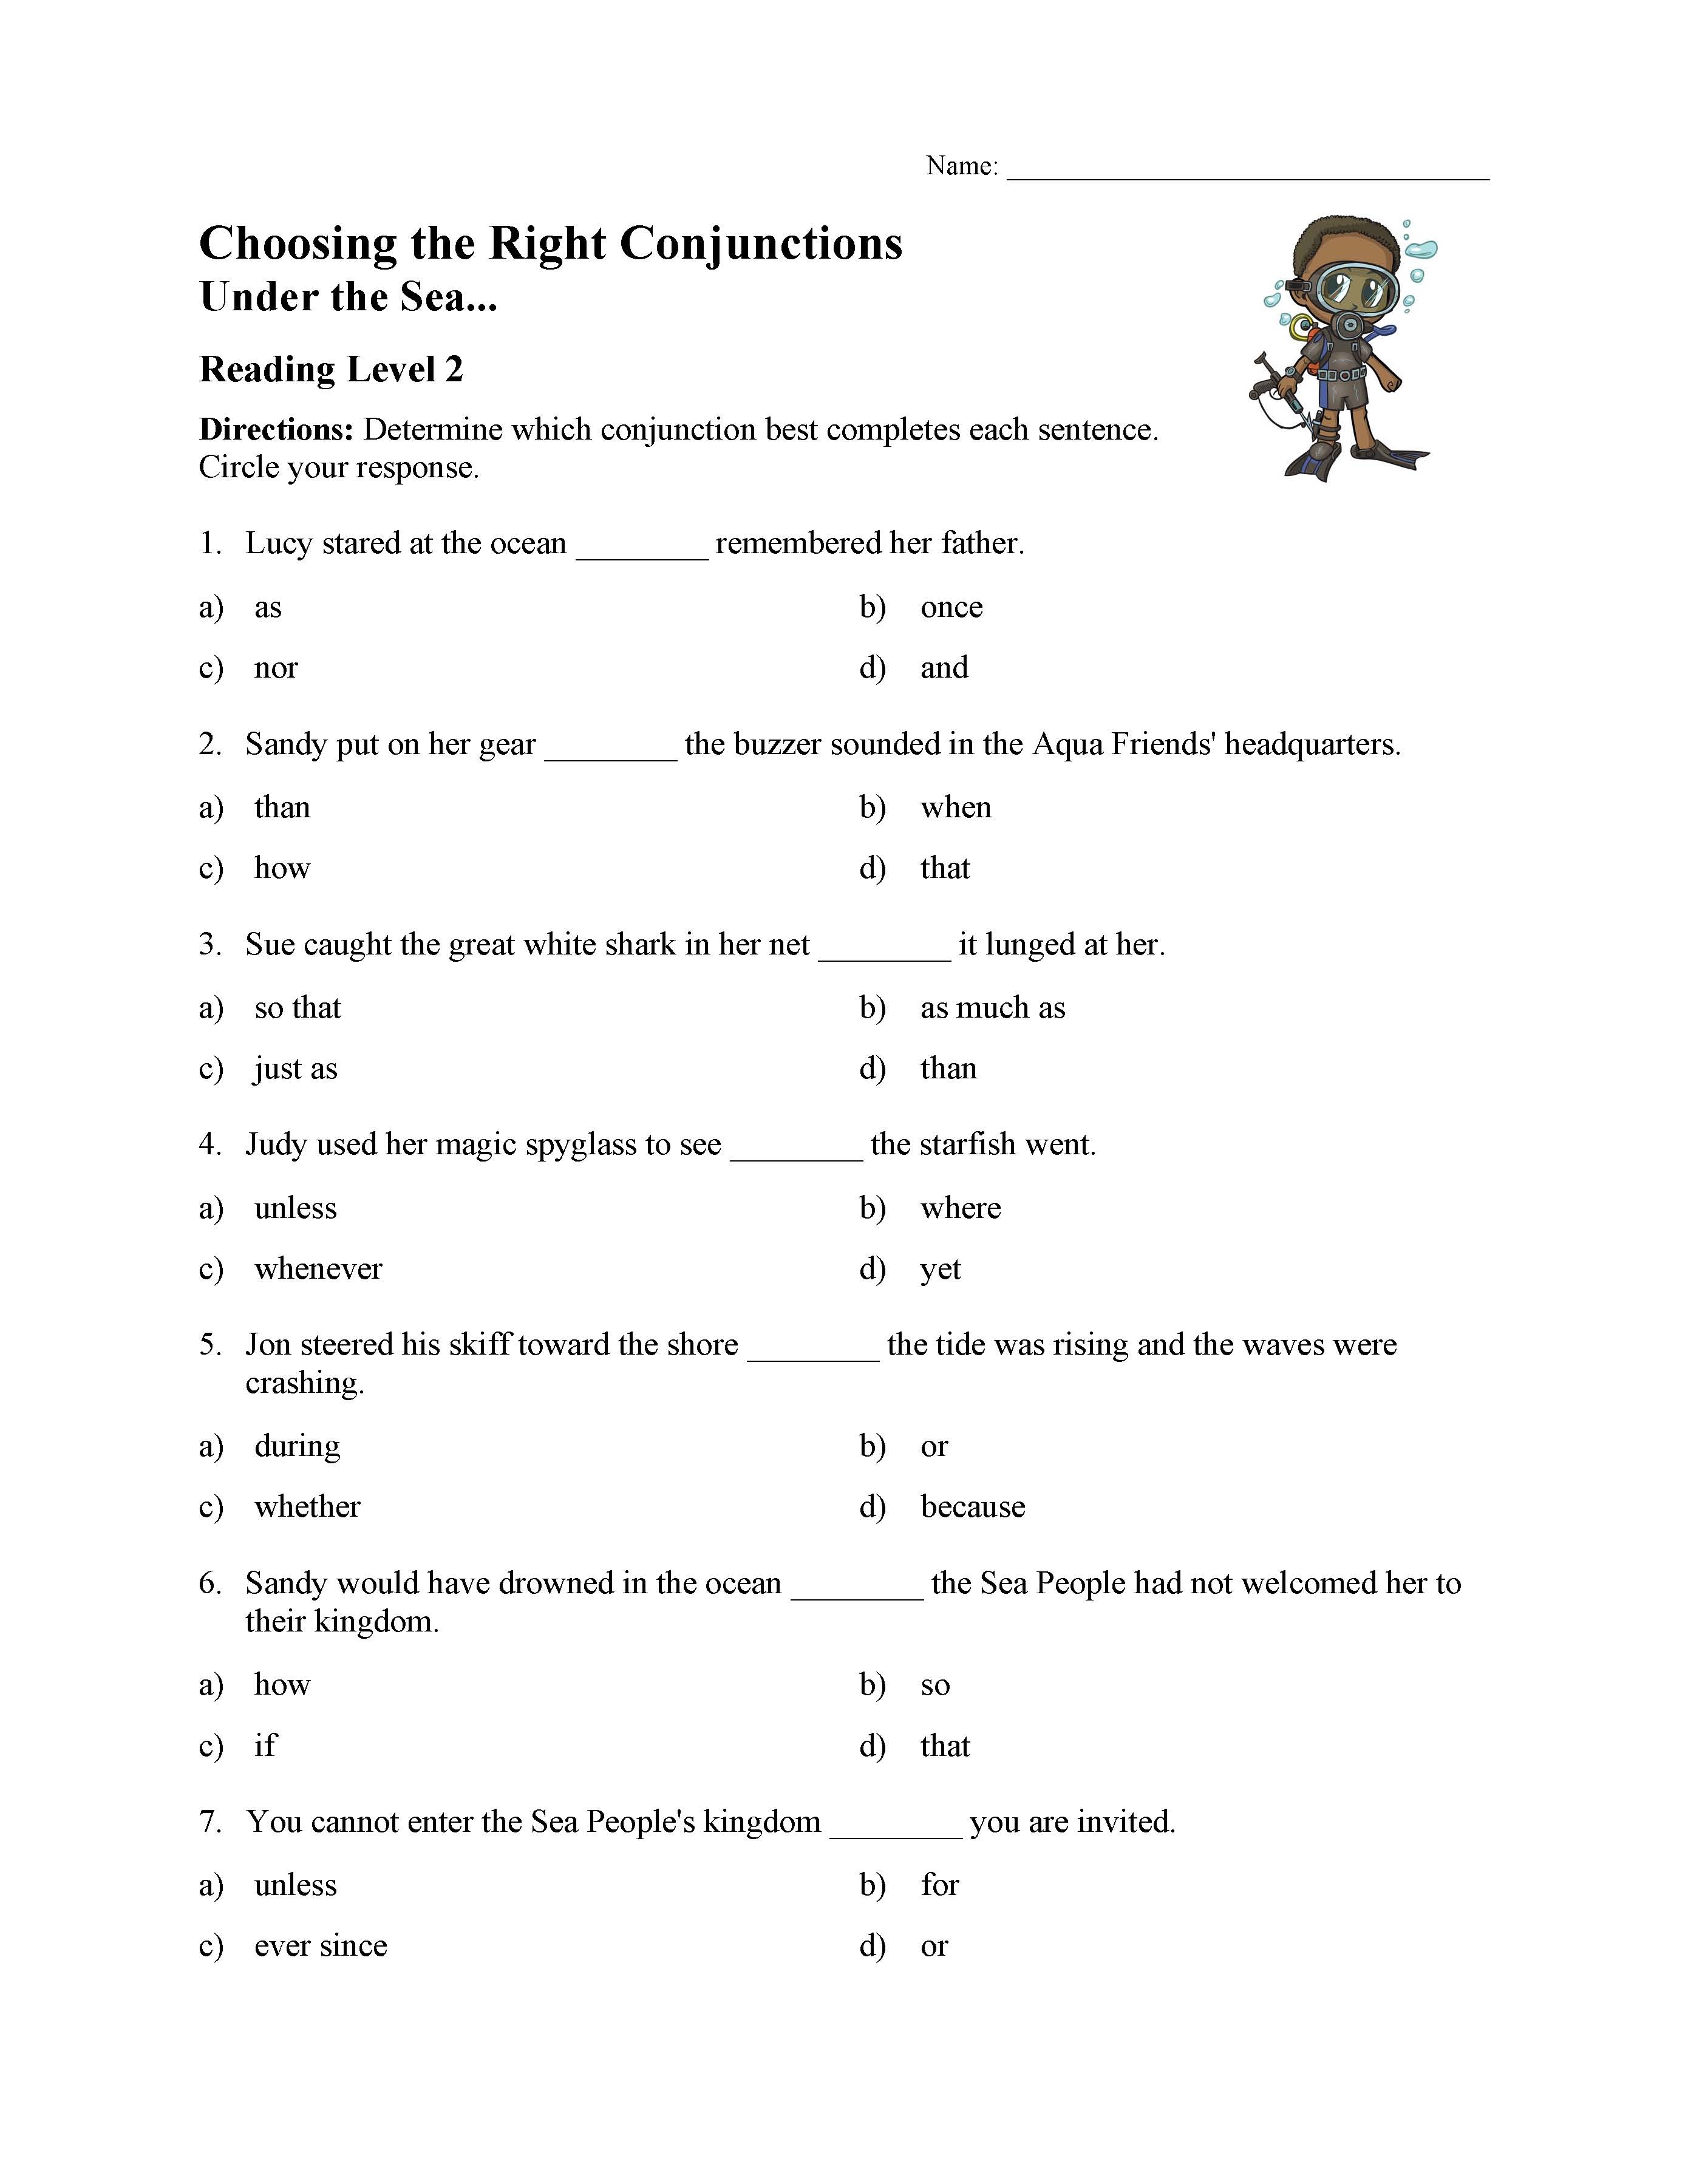 This is a preview image of the Choosing the Right Conjunction Worksheet - Reading Level 2.